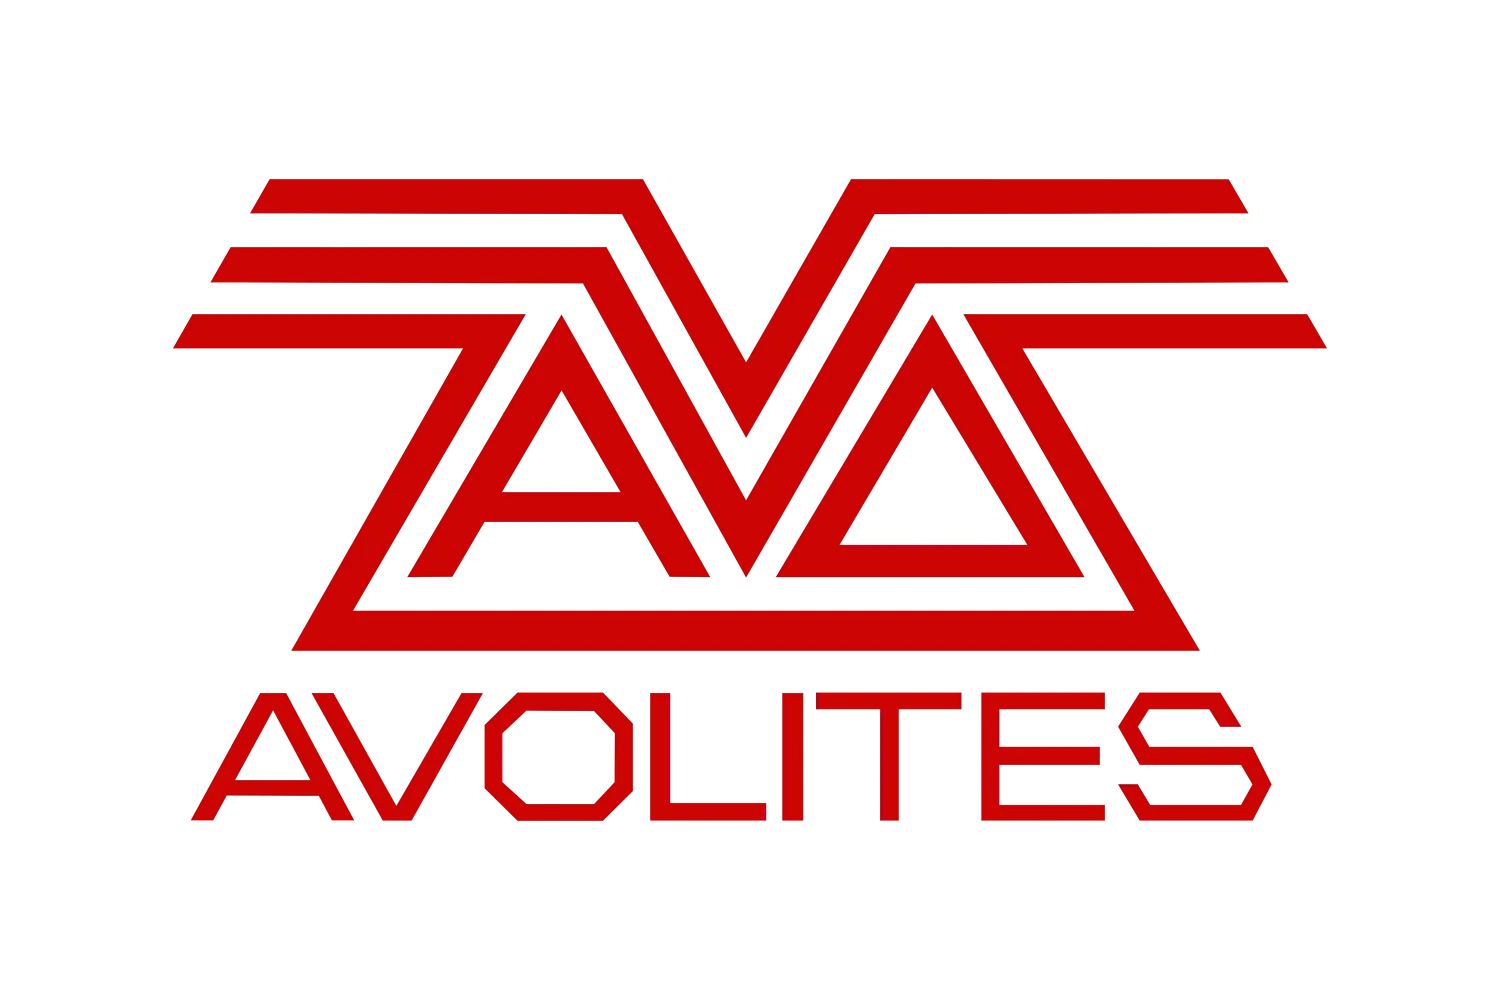 Logo of Avolites, a company known for manufacturing lighting control consoles, dimmers, and media servers for the entertainment industry installations overview, displayed in a stylized red font on a black background.